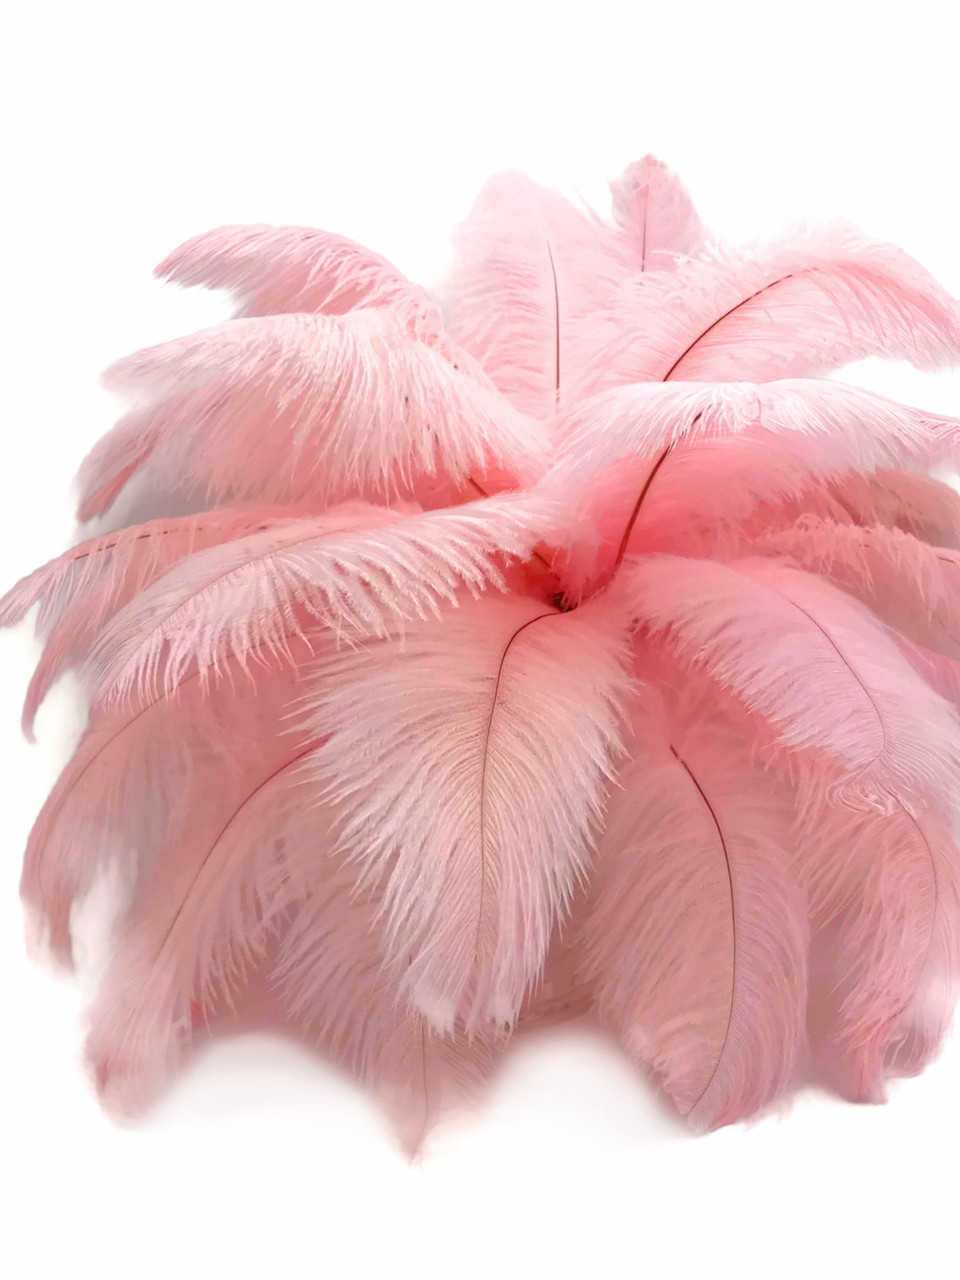 Retro Pink Ostrich Feather 26-28 Inch/5-100PCS Home Decor